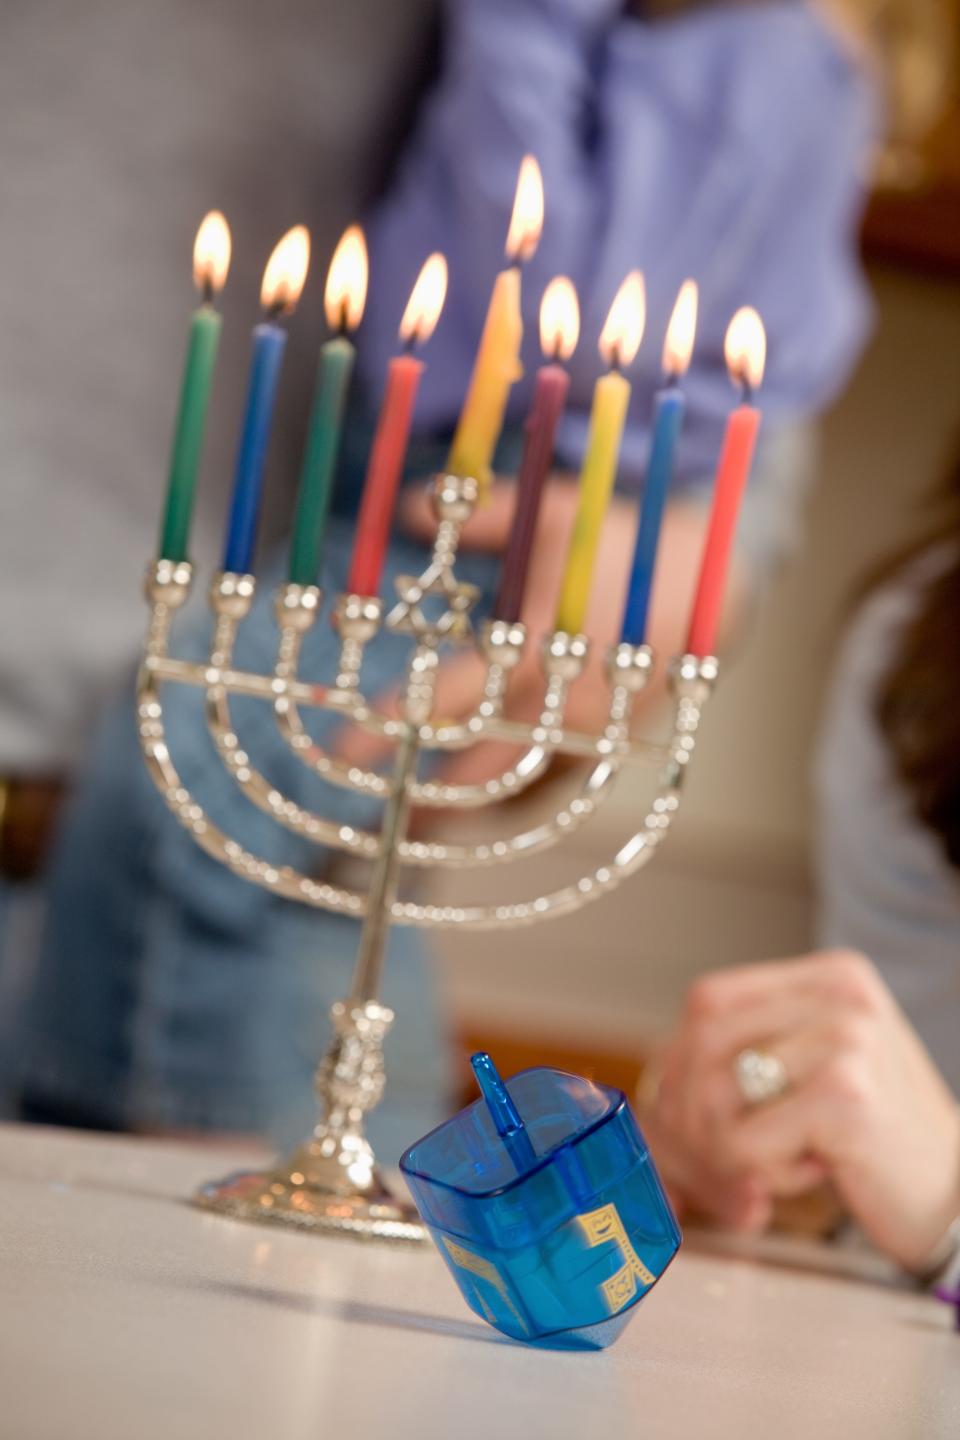 Hanukkah was originally a minor celebration, but has become a widely recognized holiday in America.